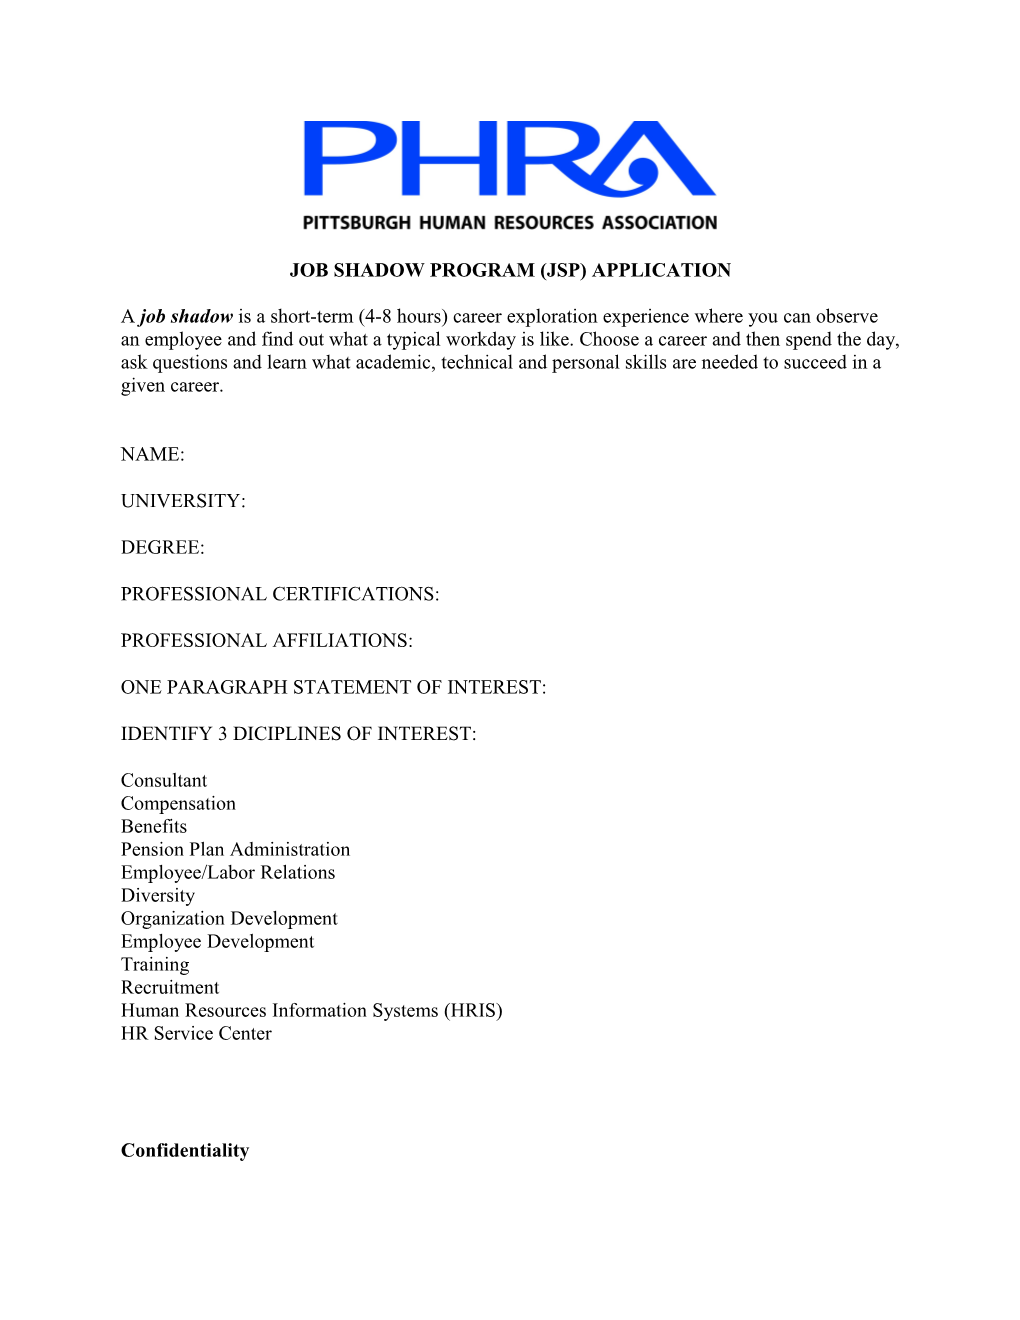 PHRA Board of Directors Candidate Biography